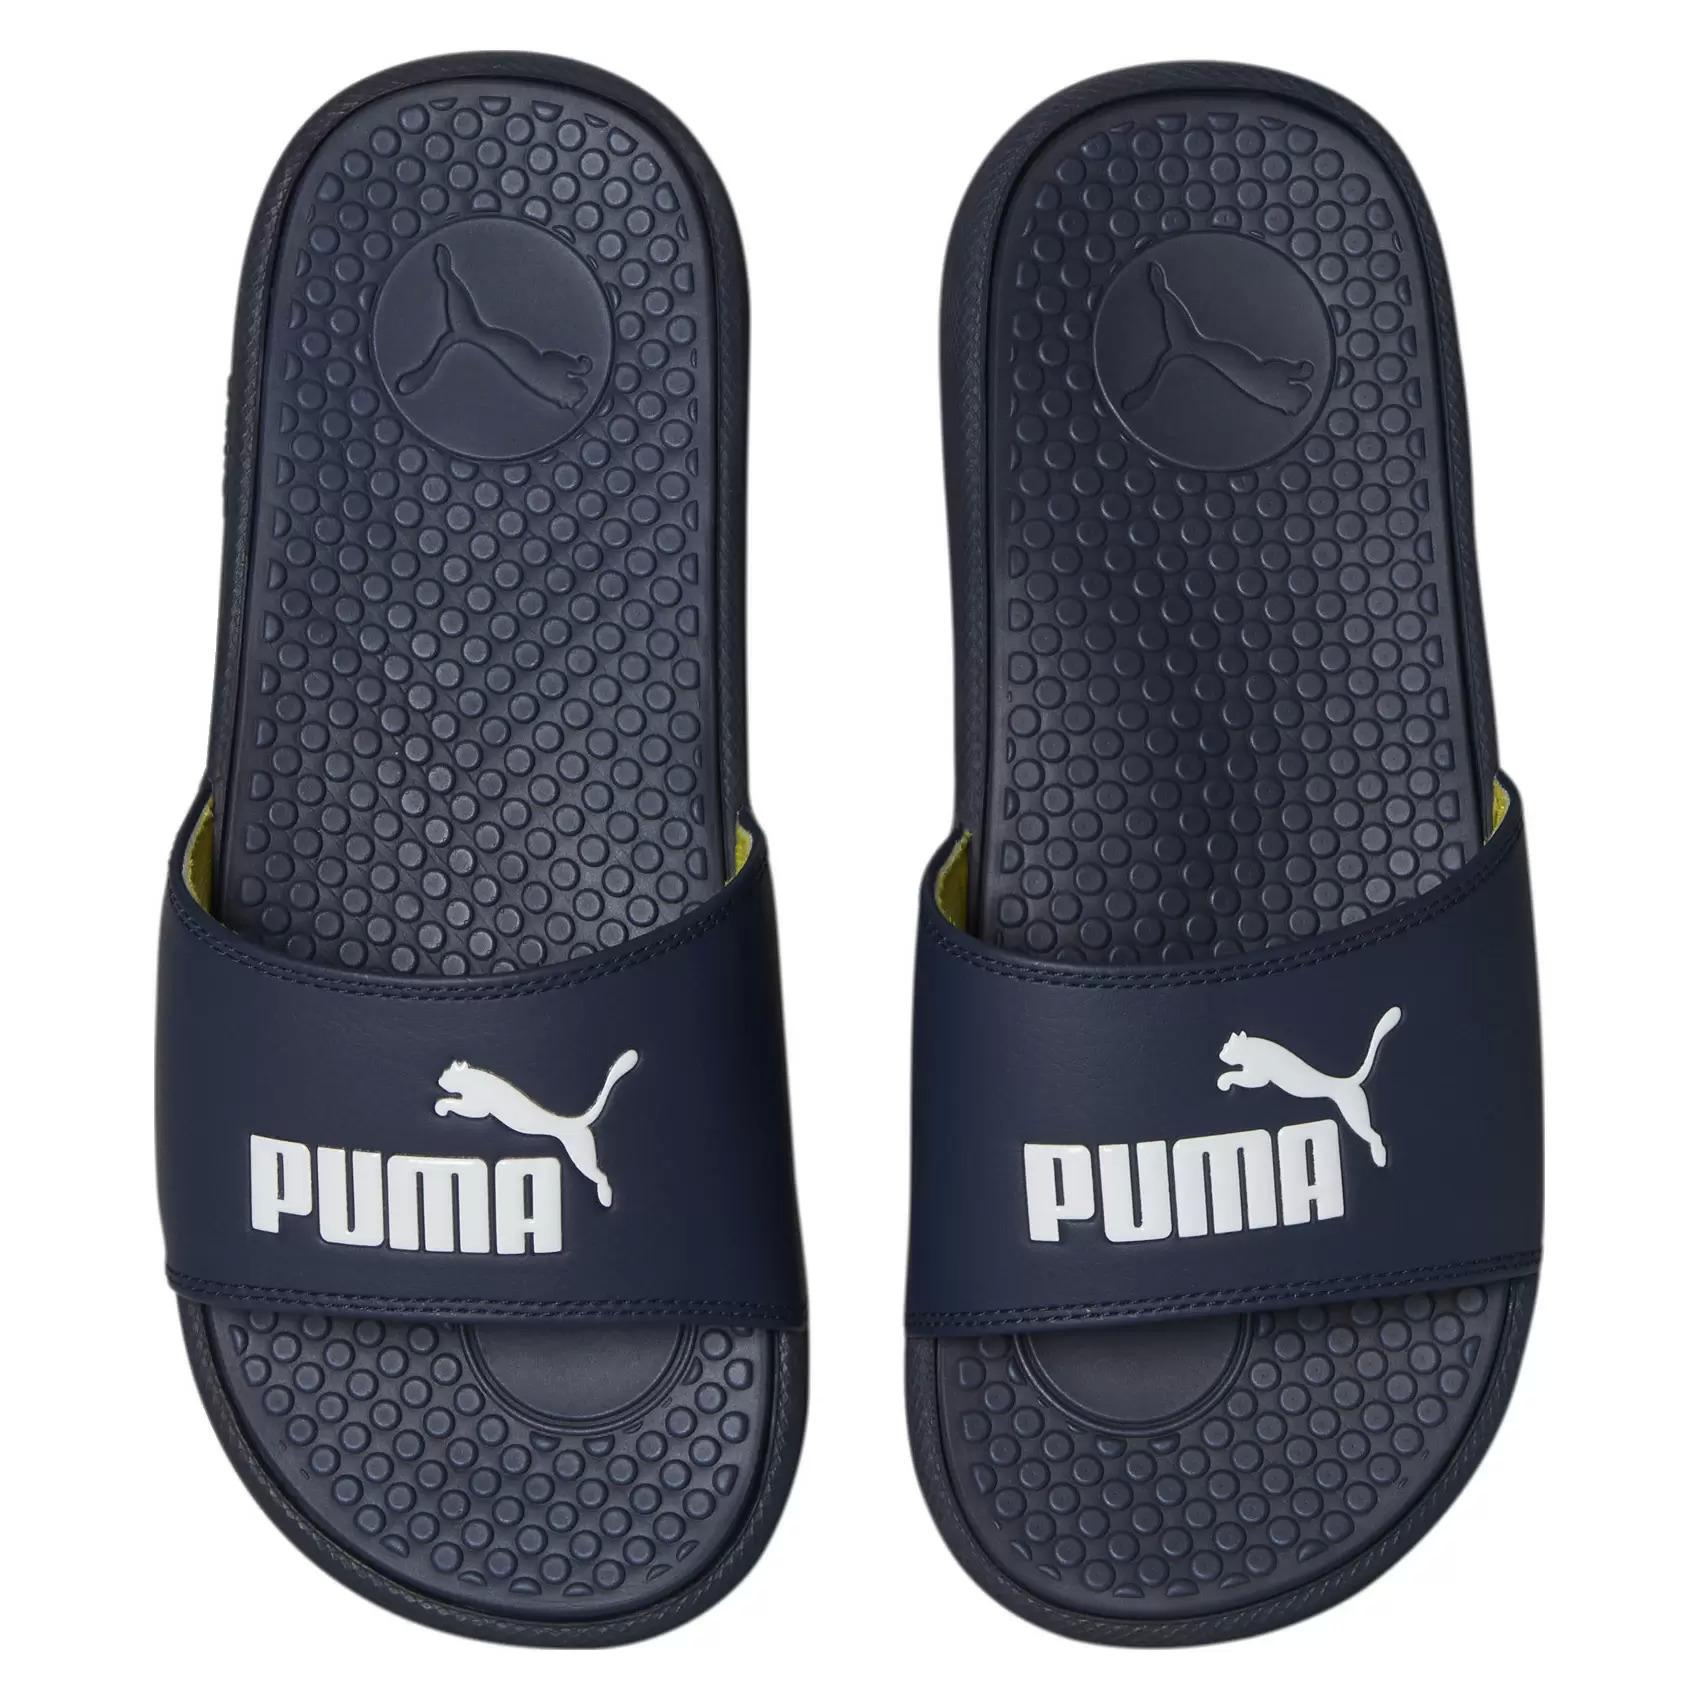 2 Puma Slides Slippers for $19.99 Shipped